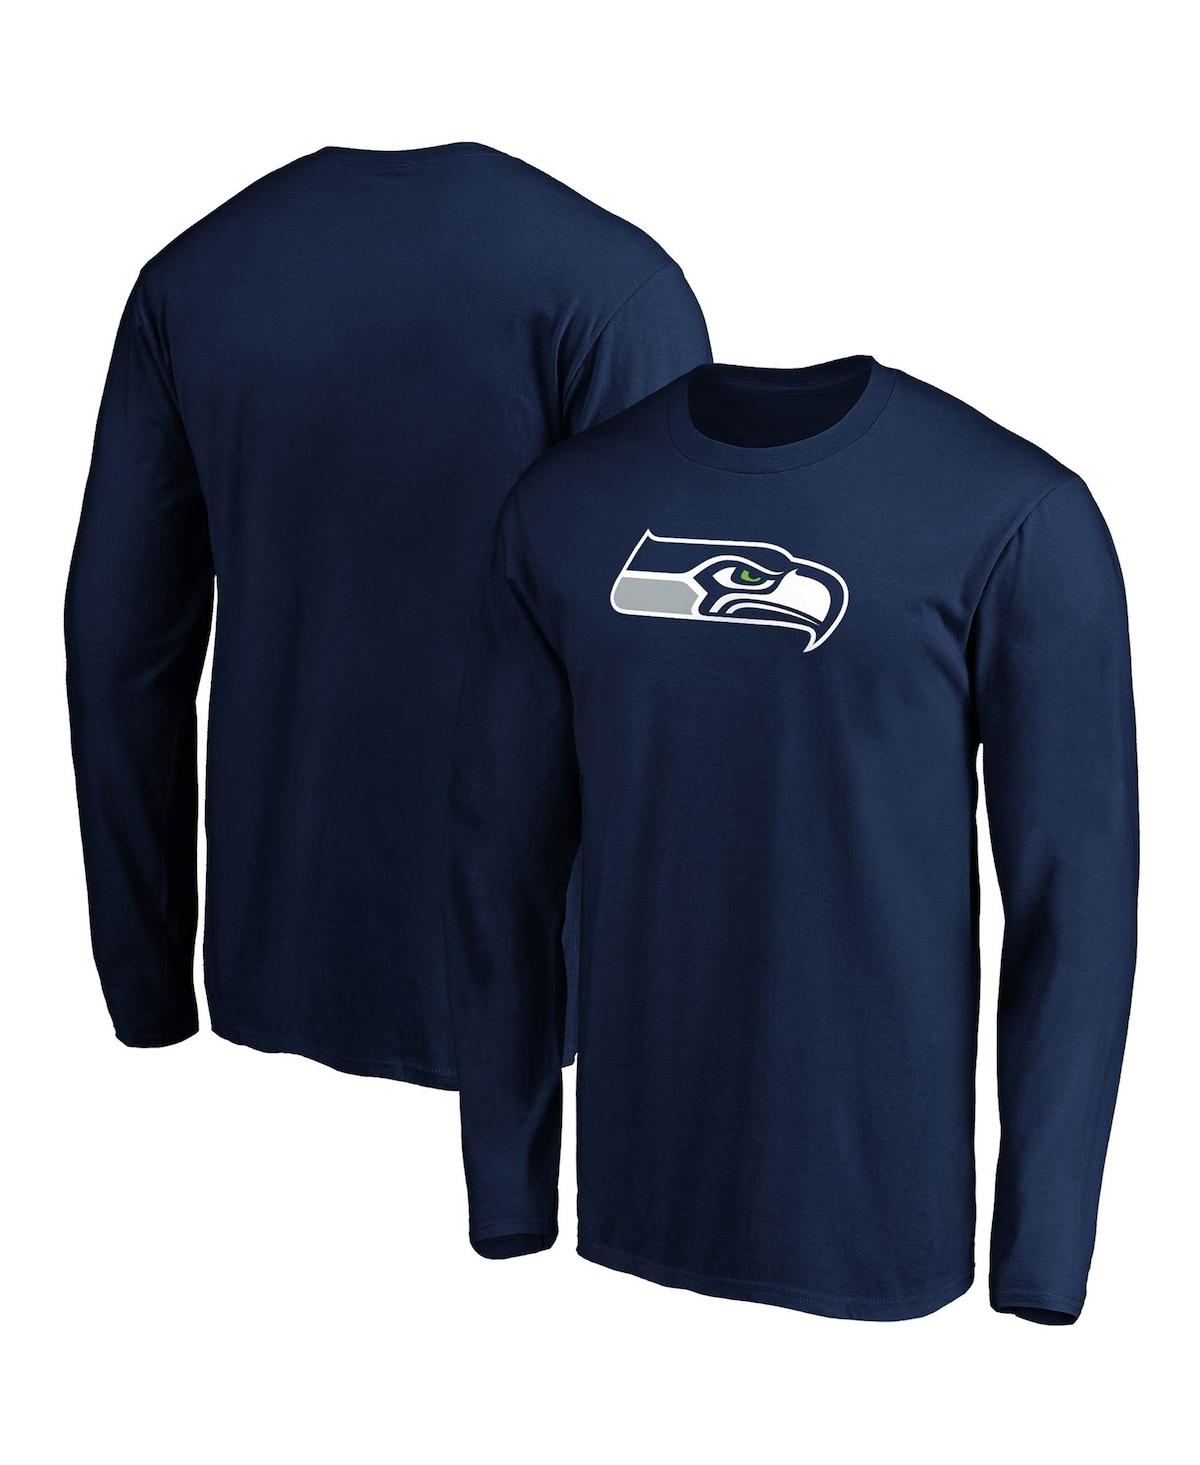 Shop Fanatics Men's  College Navy Seattle Seahawks Big And Tall Primary Team Logo Long Sleeve T-shirt